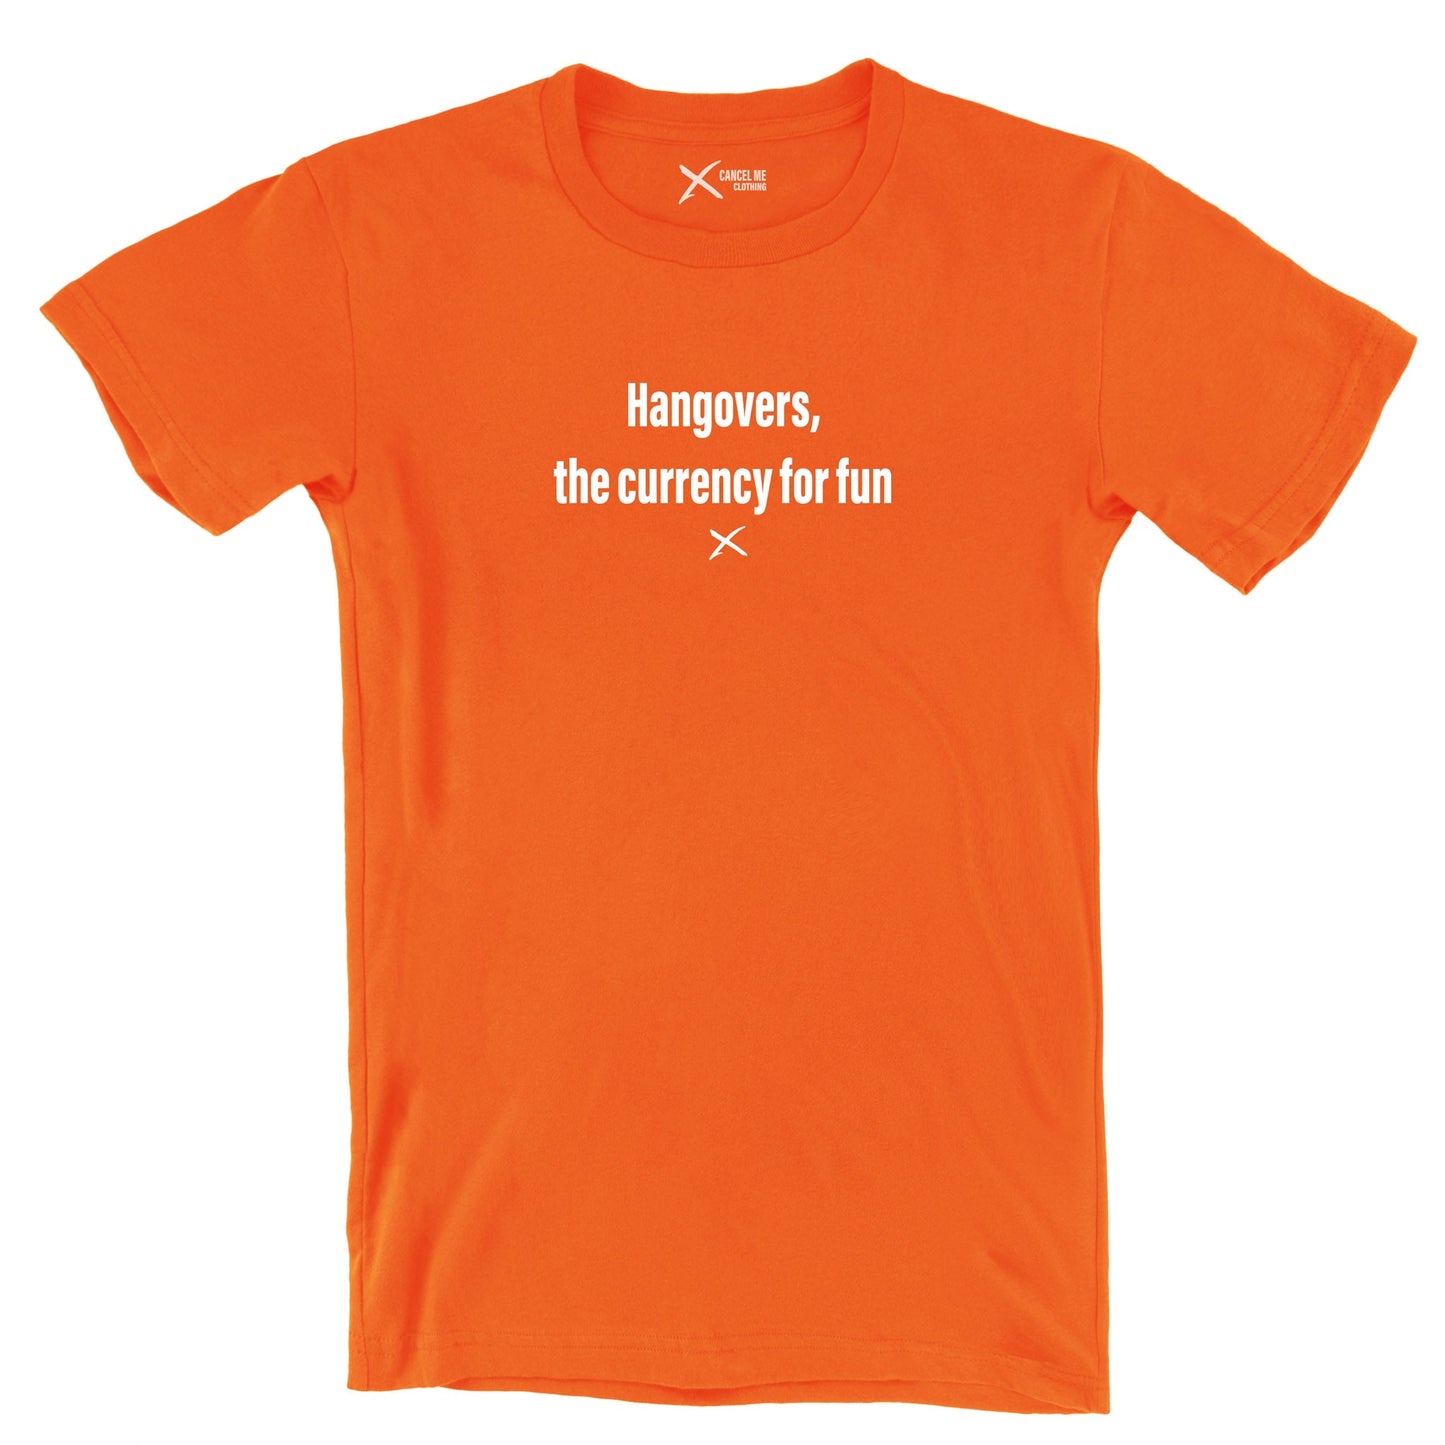 Hangovers, the currency for fun - Shirt